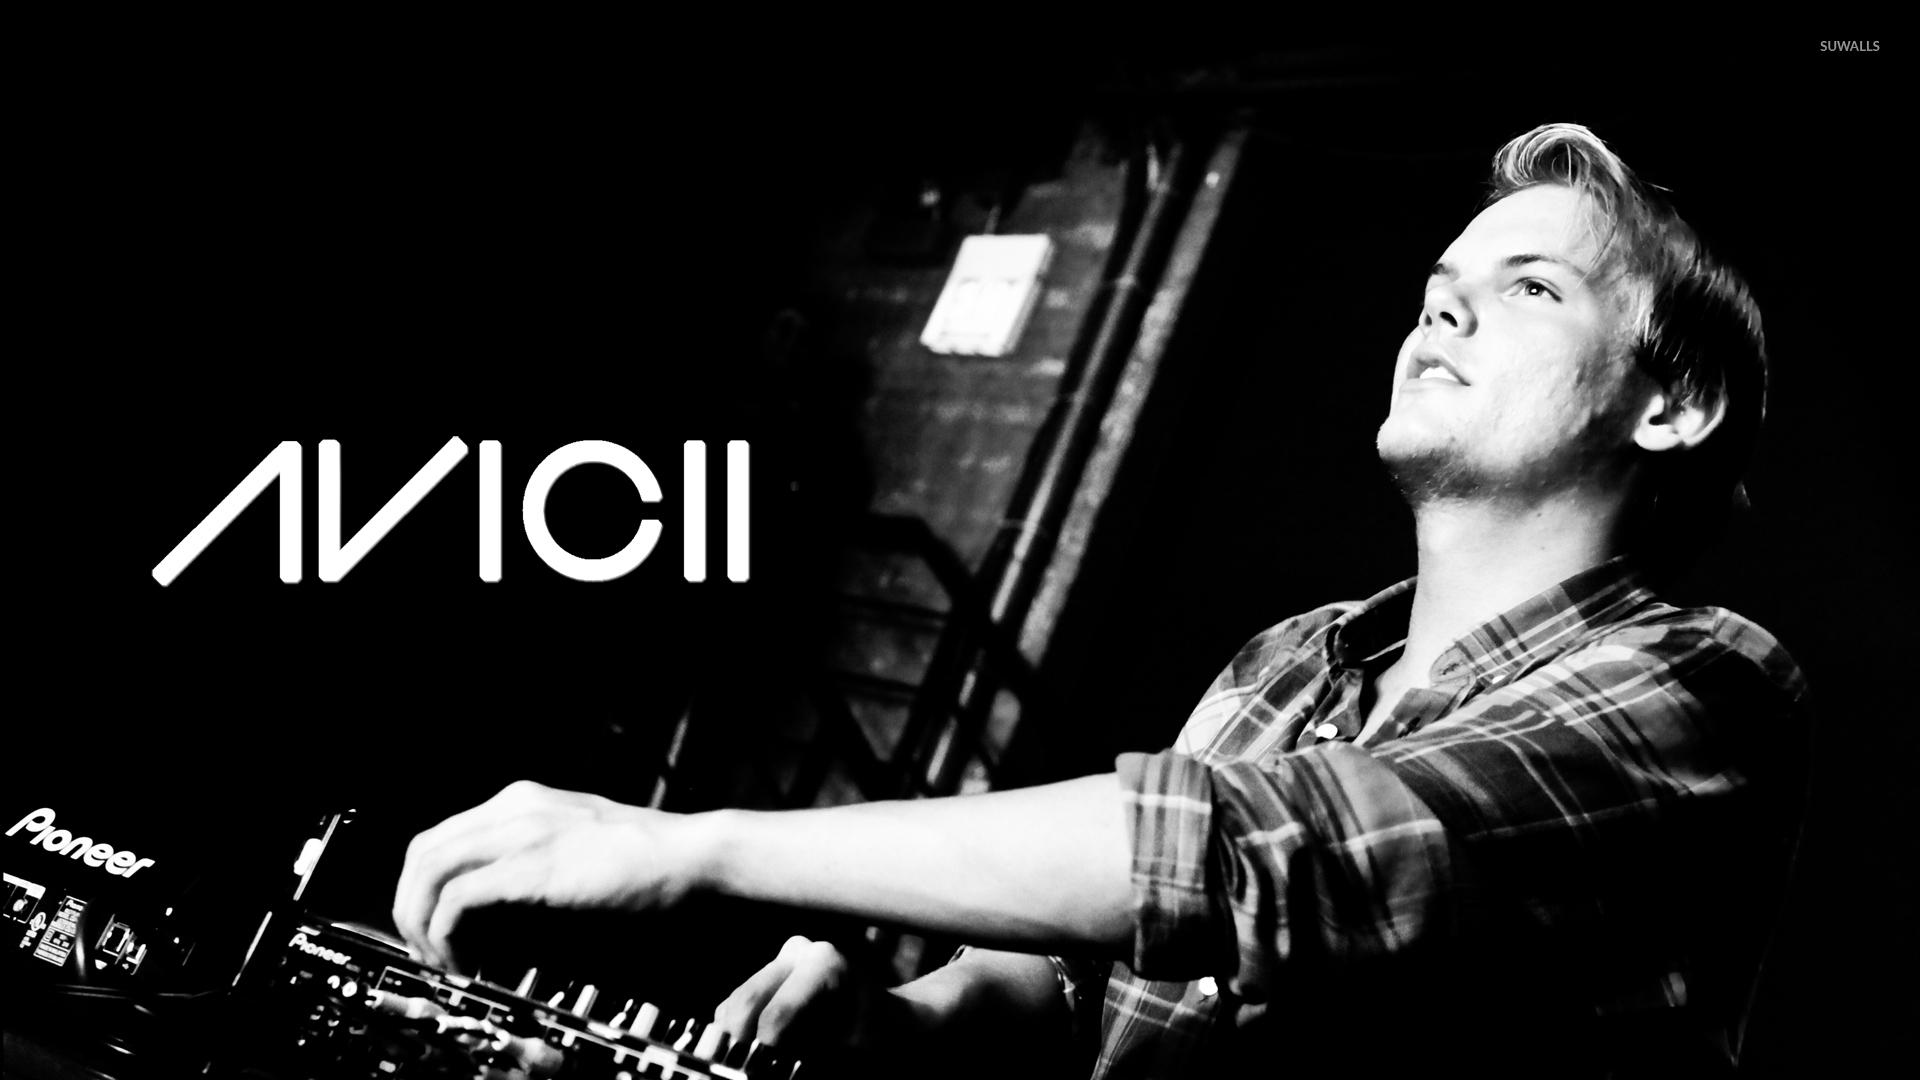 Download Avicii wallpapers for mobile phone free Avicii HD pictures